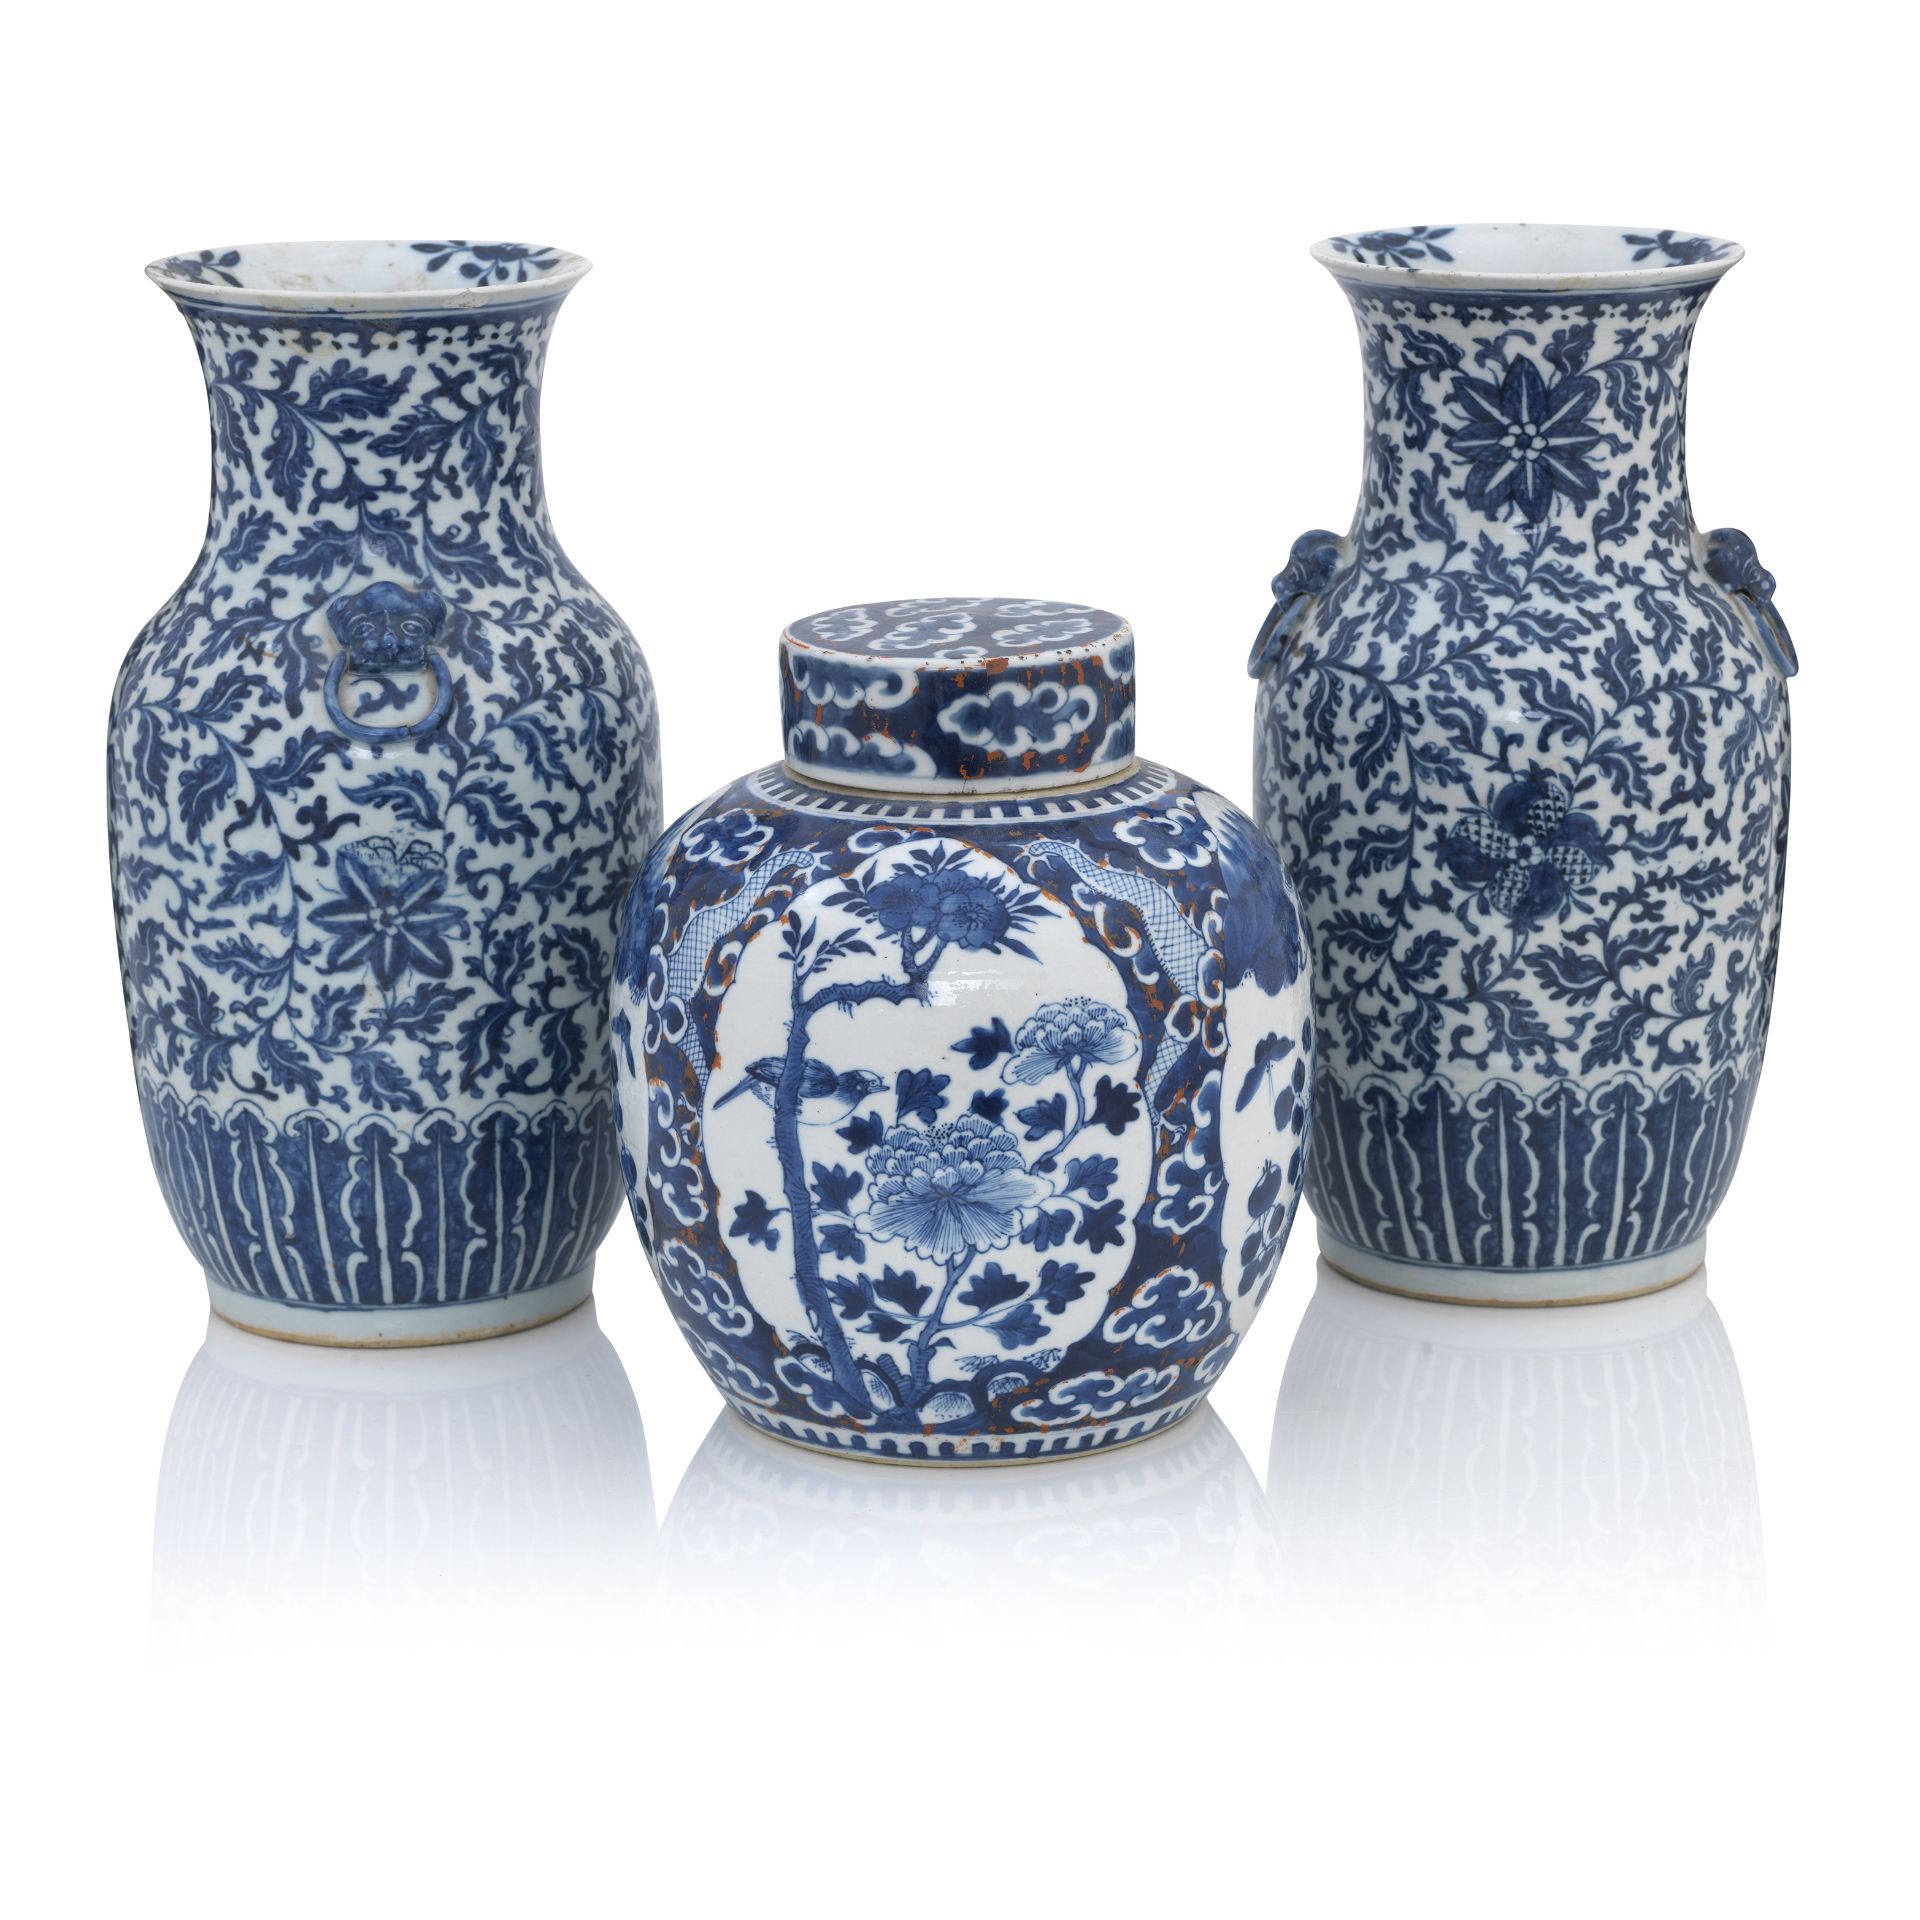 A Pair of Chinese Blue and White Baluster Vases 19th century (3)